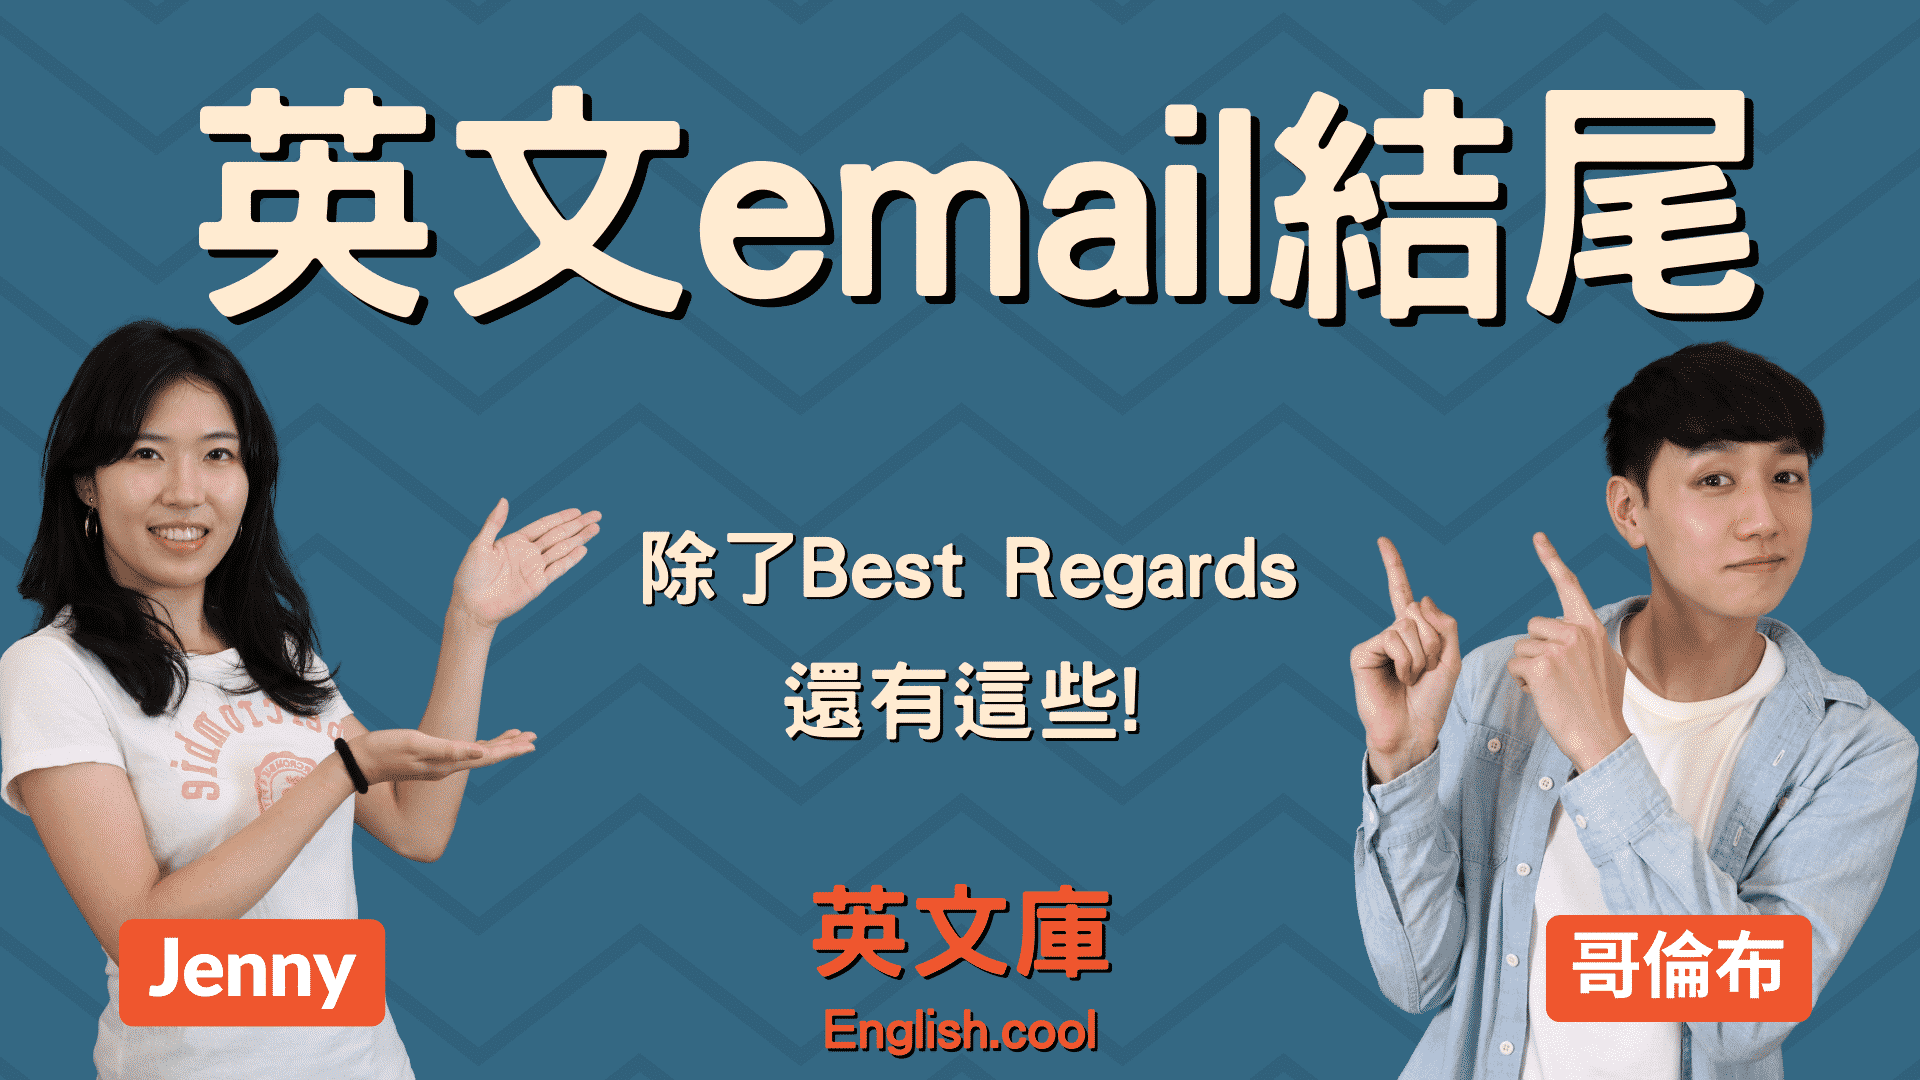 You are currently viewing 【英文email結尾】除了Best Regards、Sincerely還能寫什麼？來看範例！